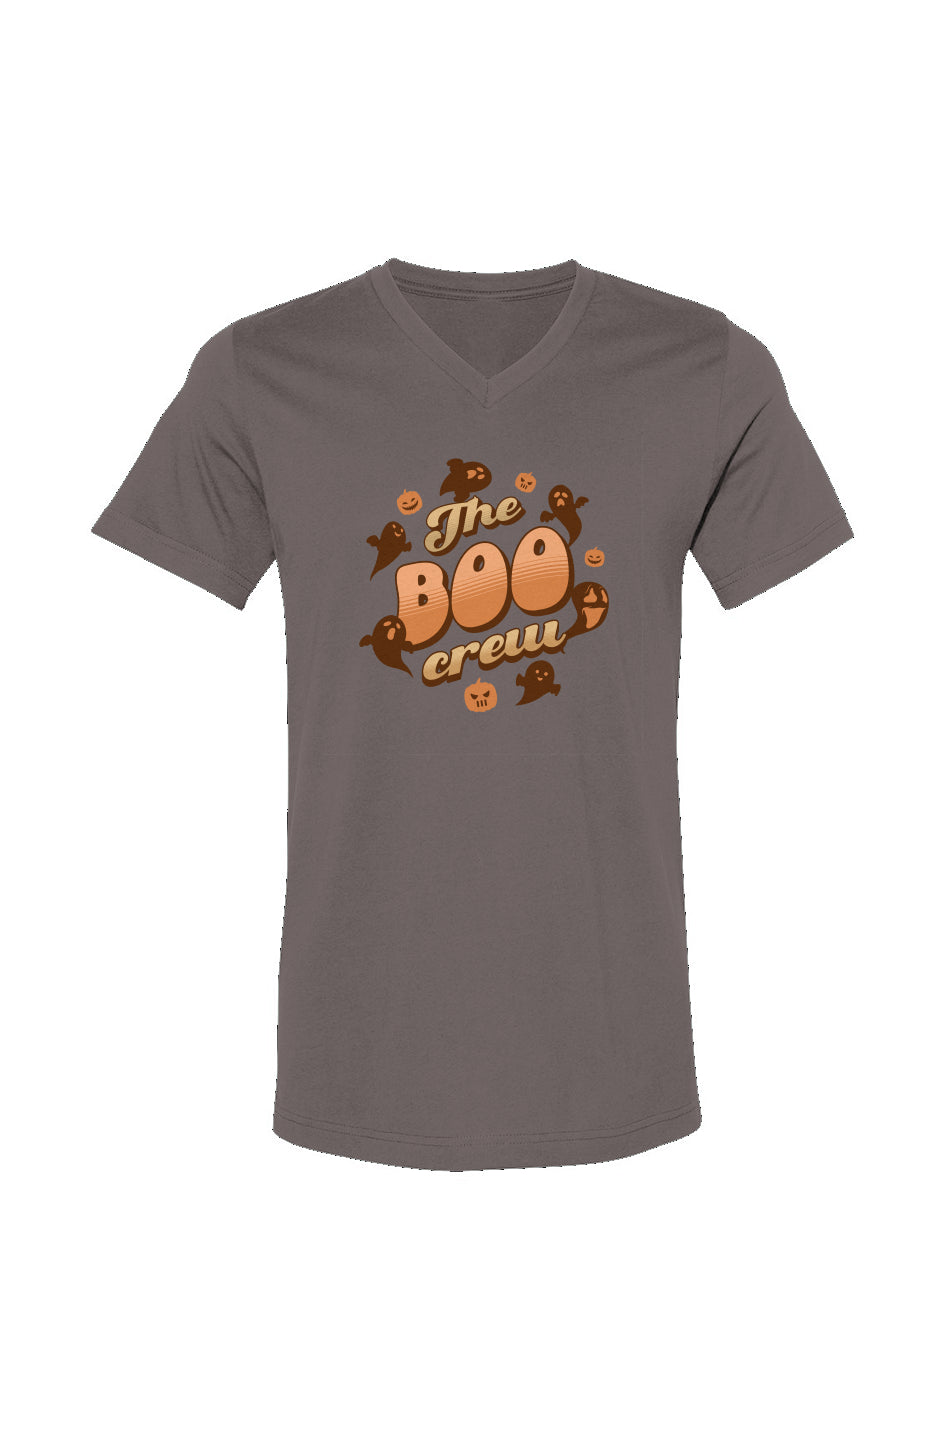 "The Boo Crew" Unisex Fit 